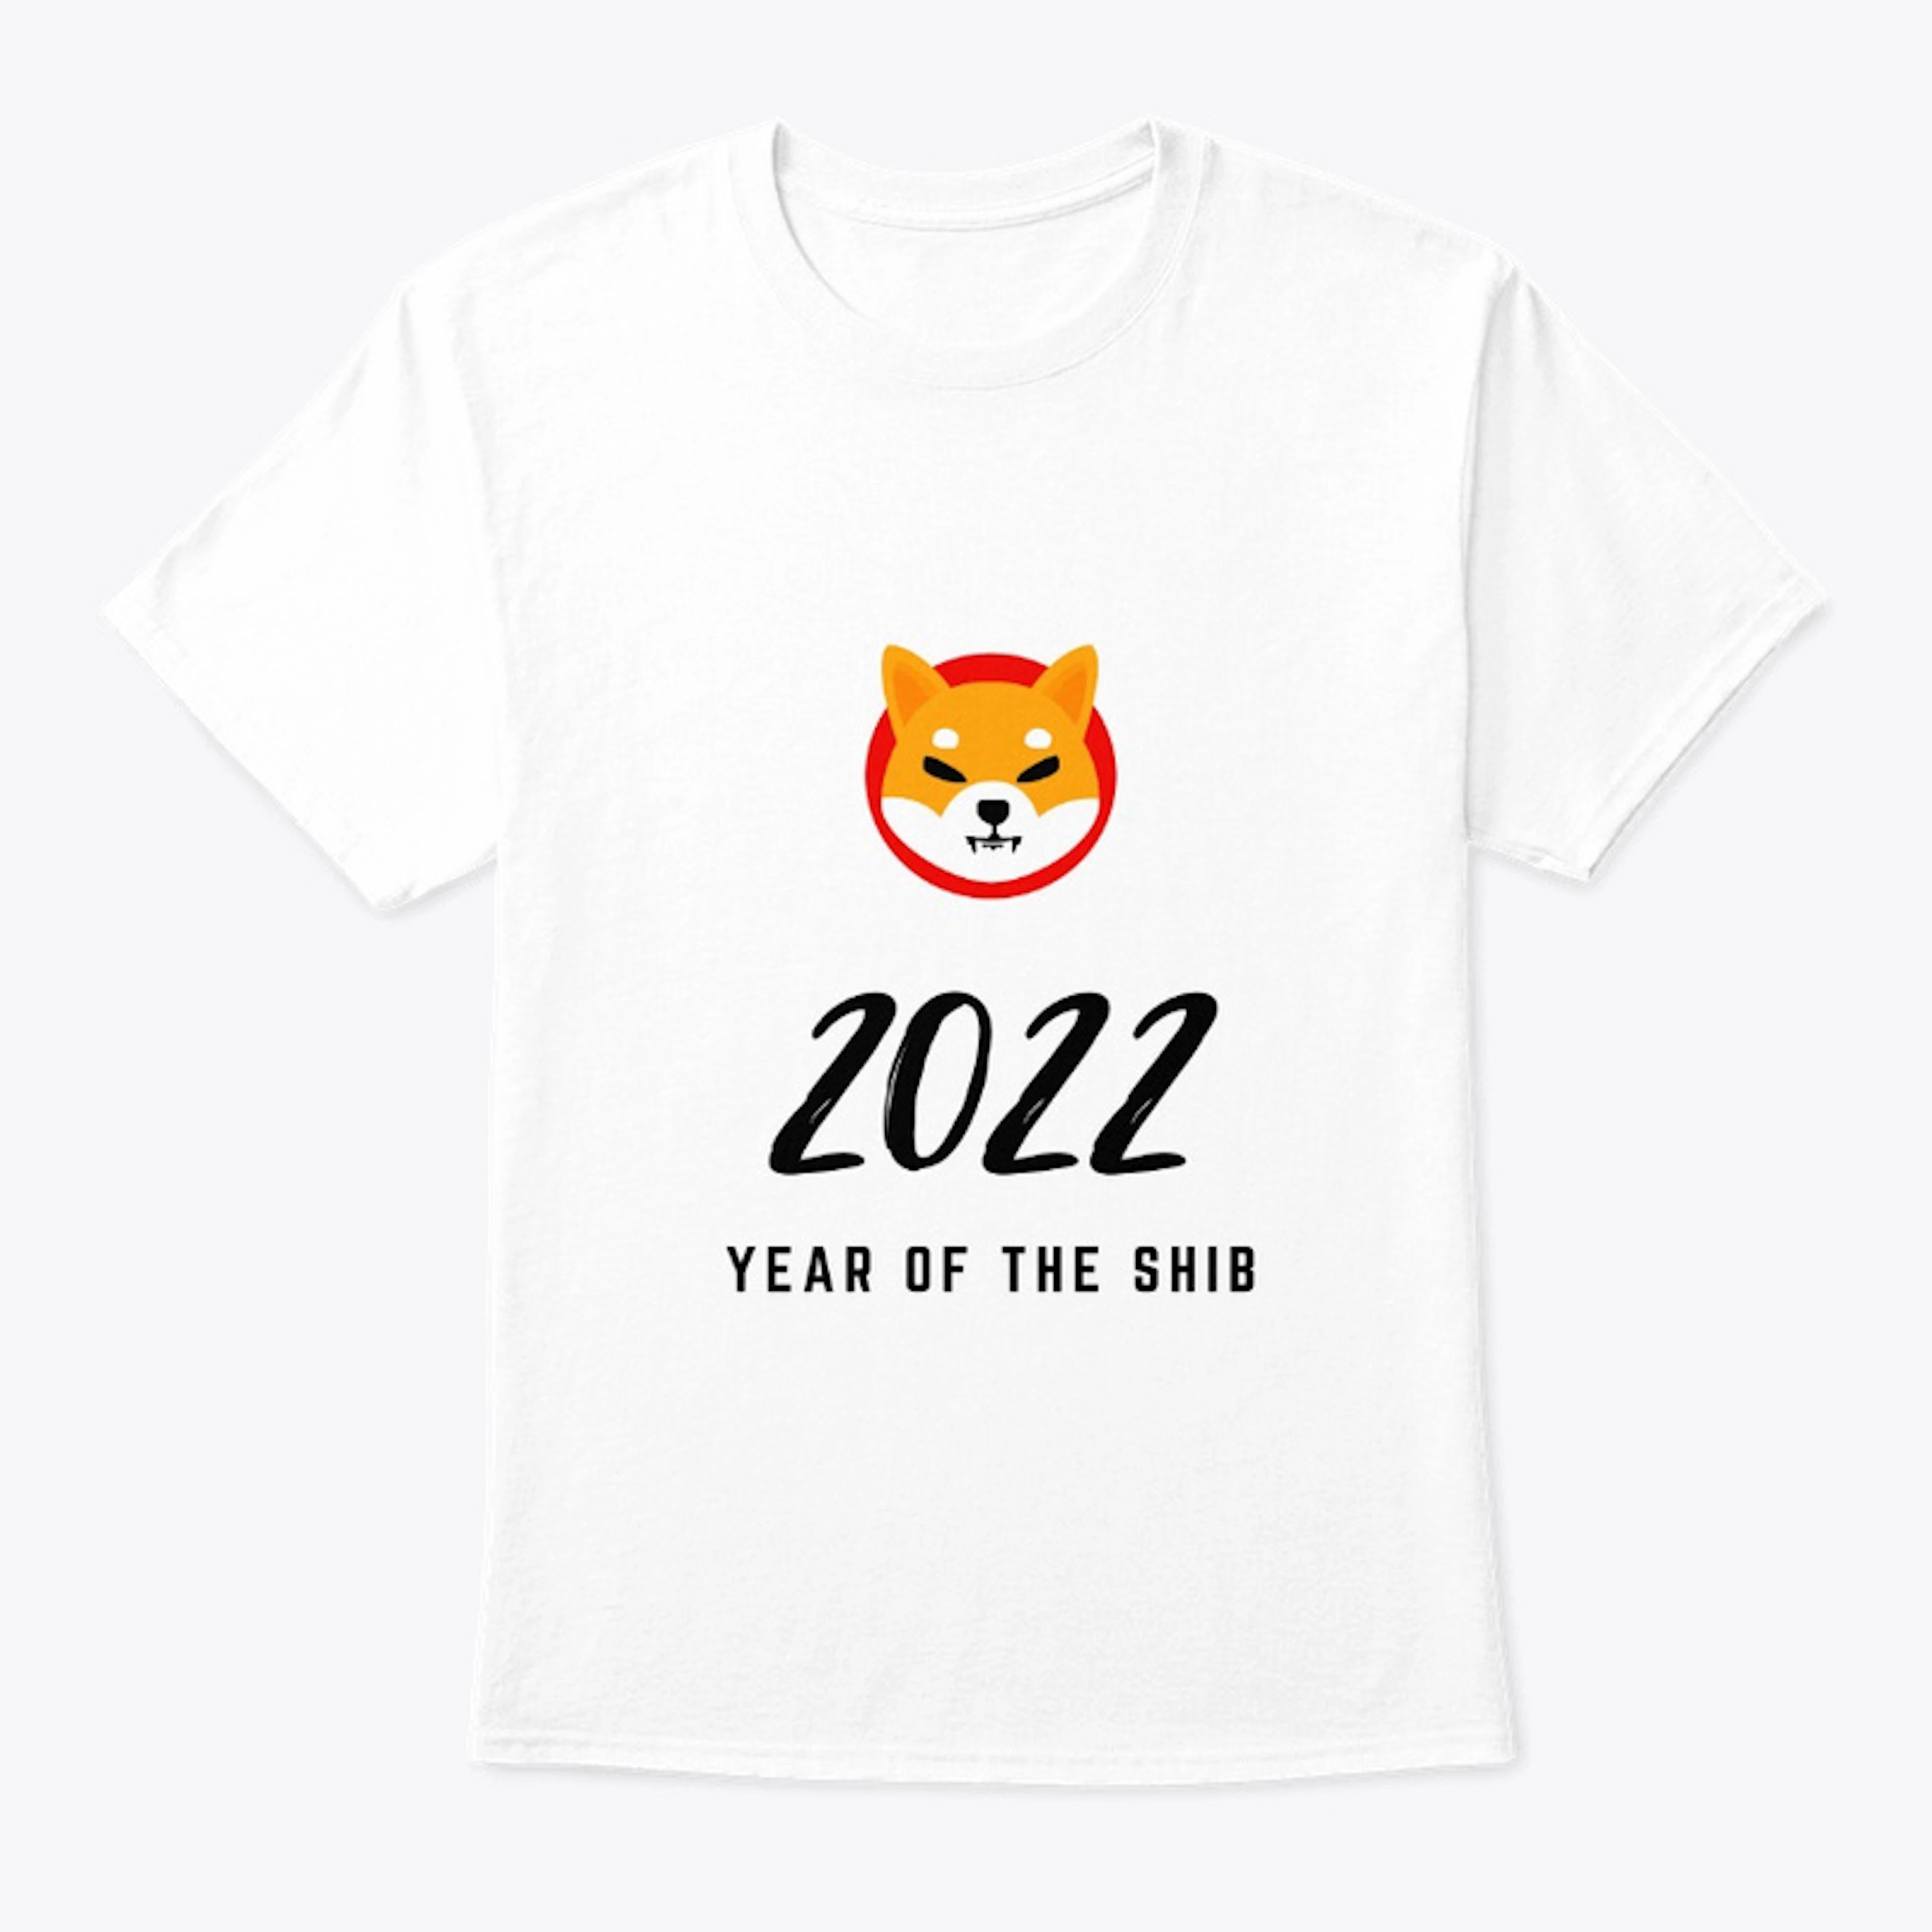 Year of the SHIB